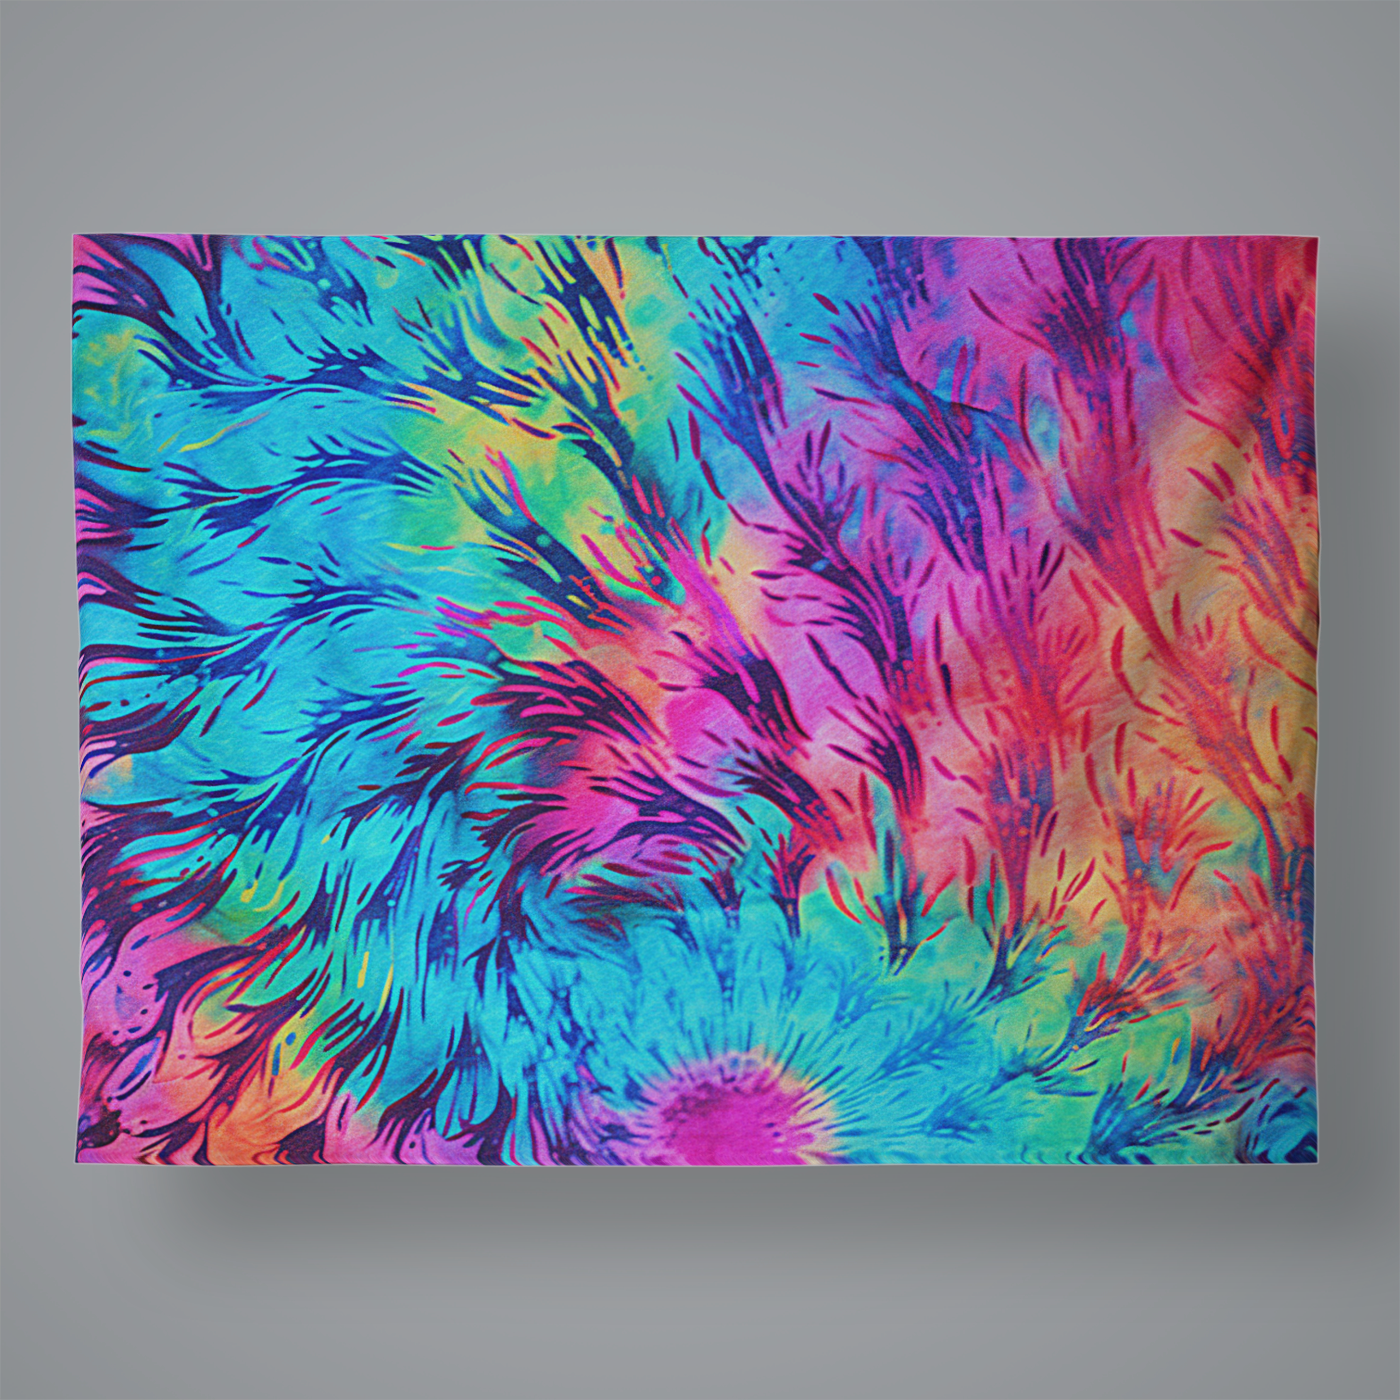 NeoTieDye2 Large Wall Tapestry 60x80